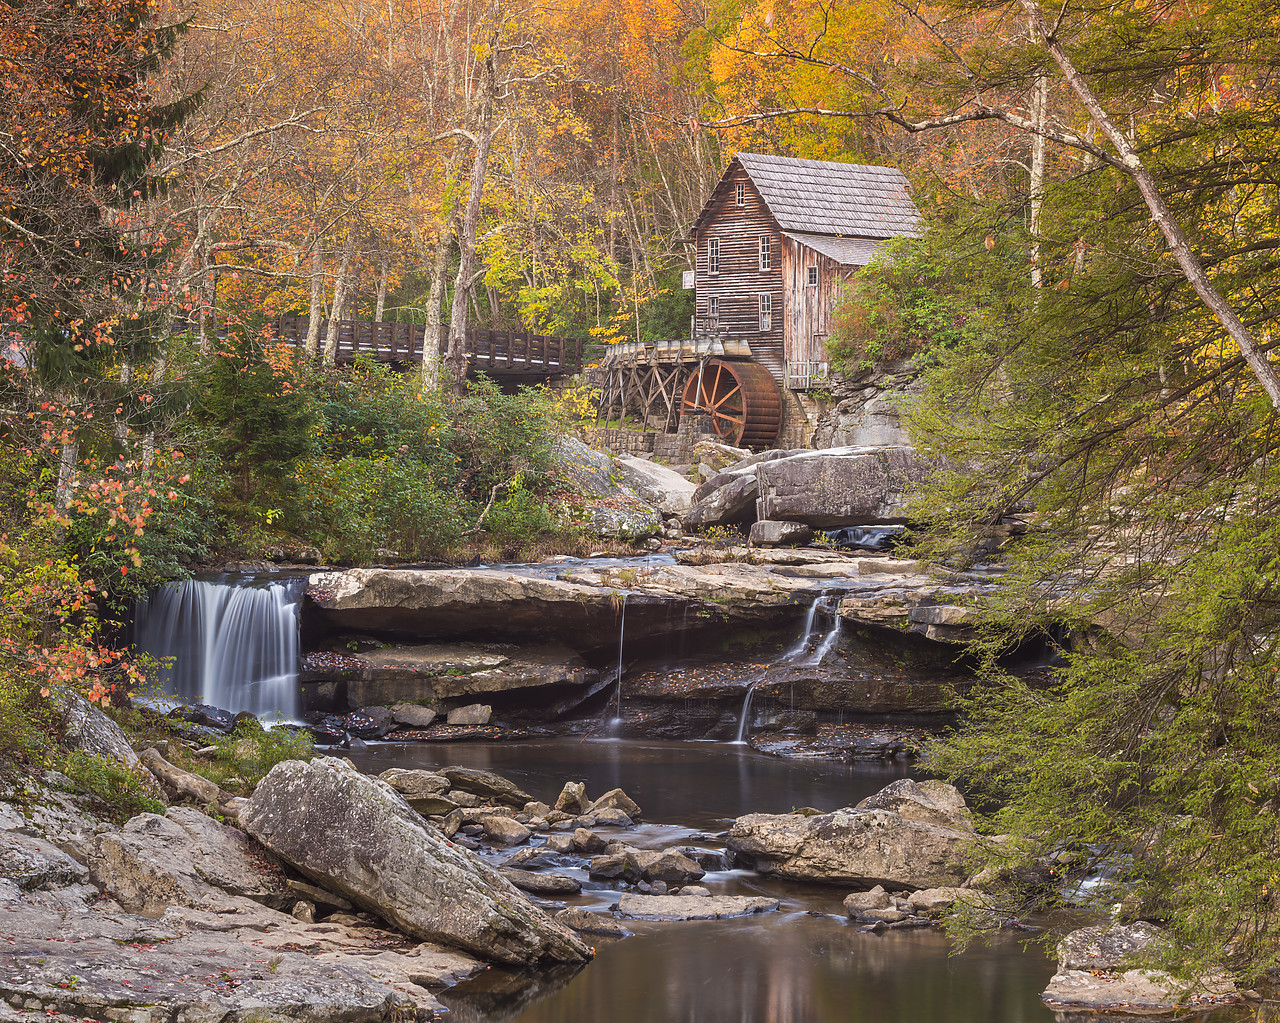 #130364-1 - Glade Creek Grist Mill in Autumn, Babcock State Park, West Virginia, USA